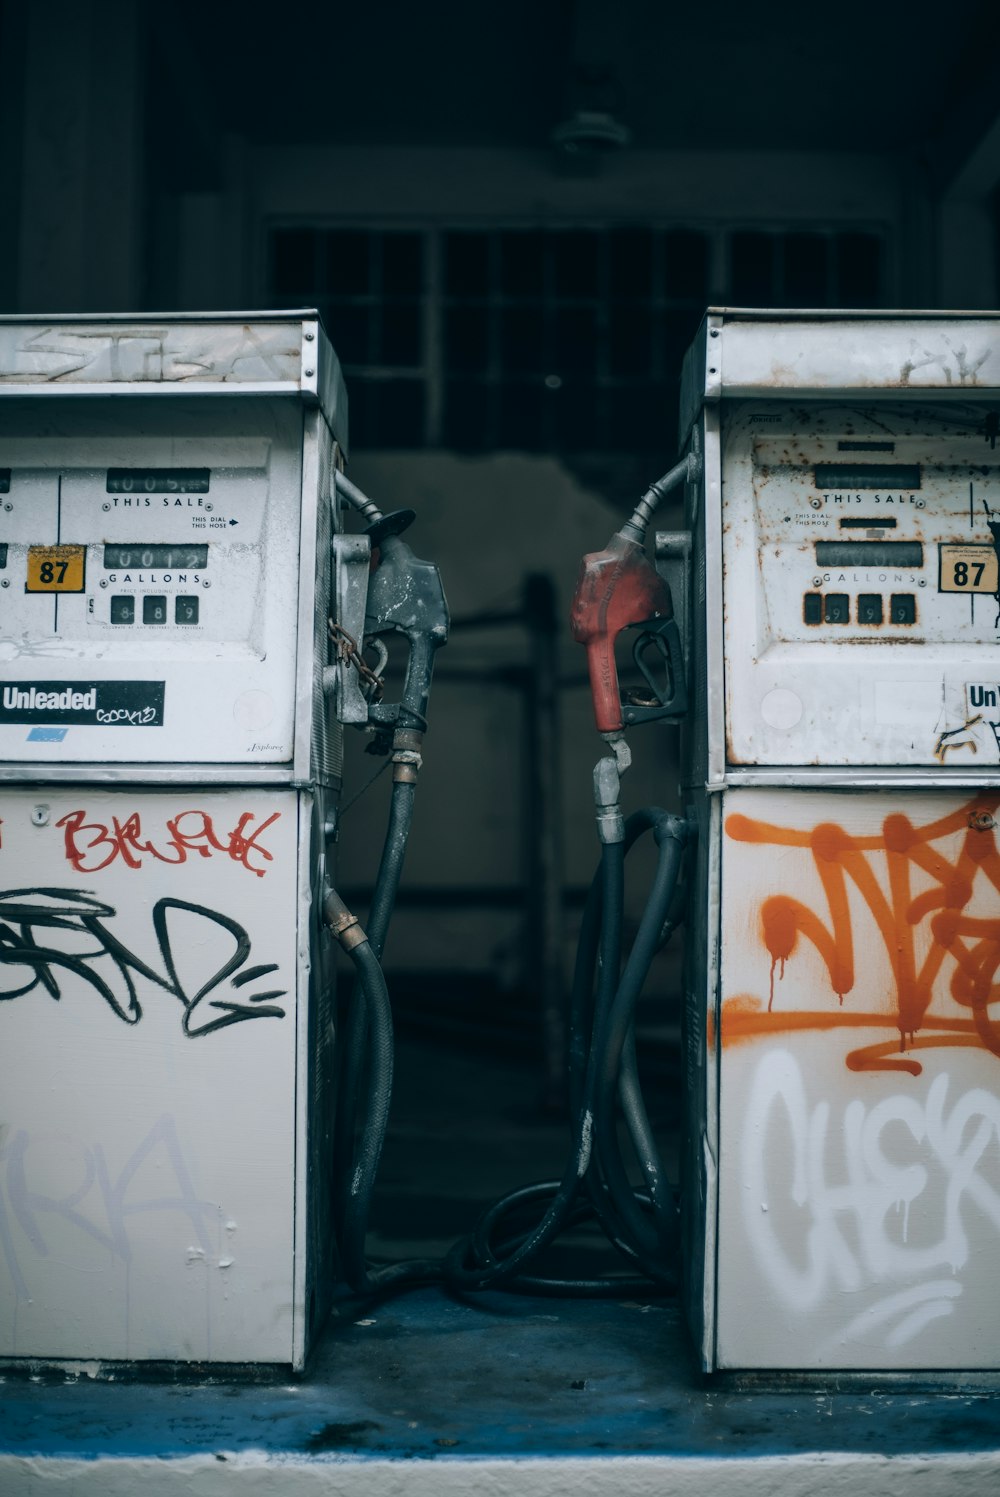 two old gas pumps with graffiti on them